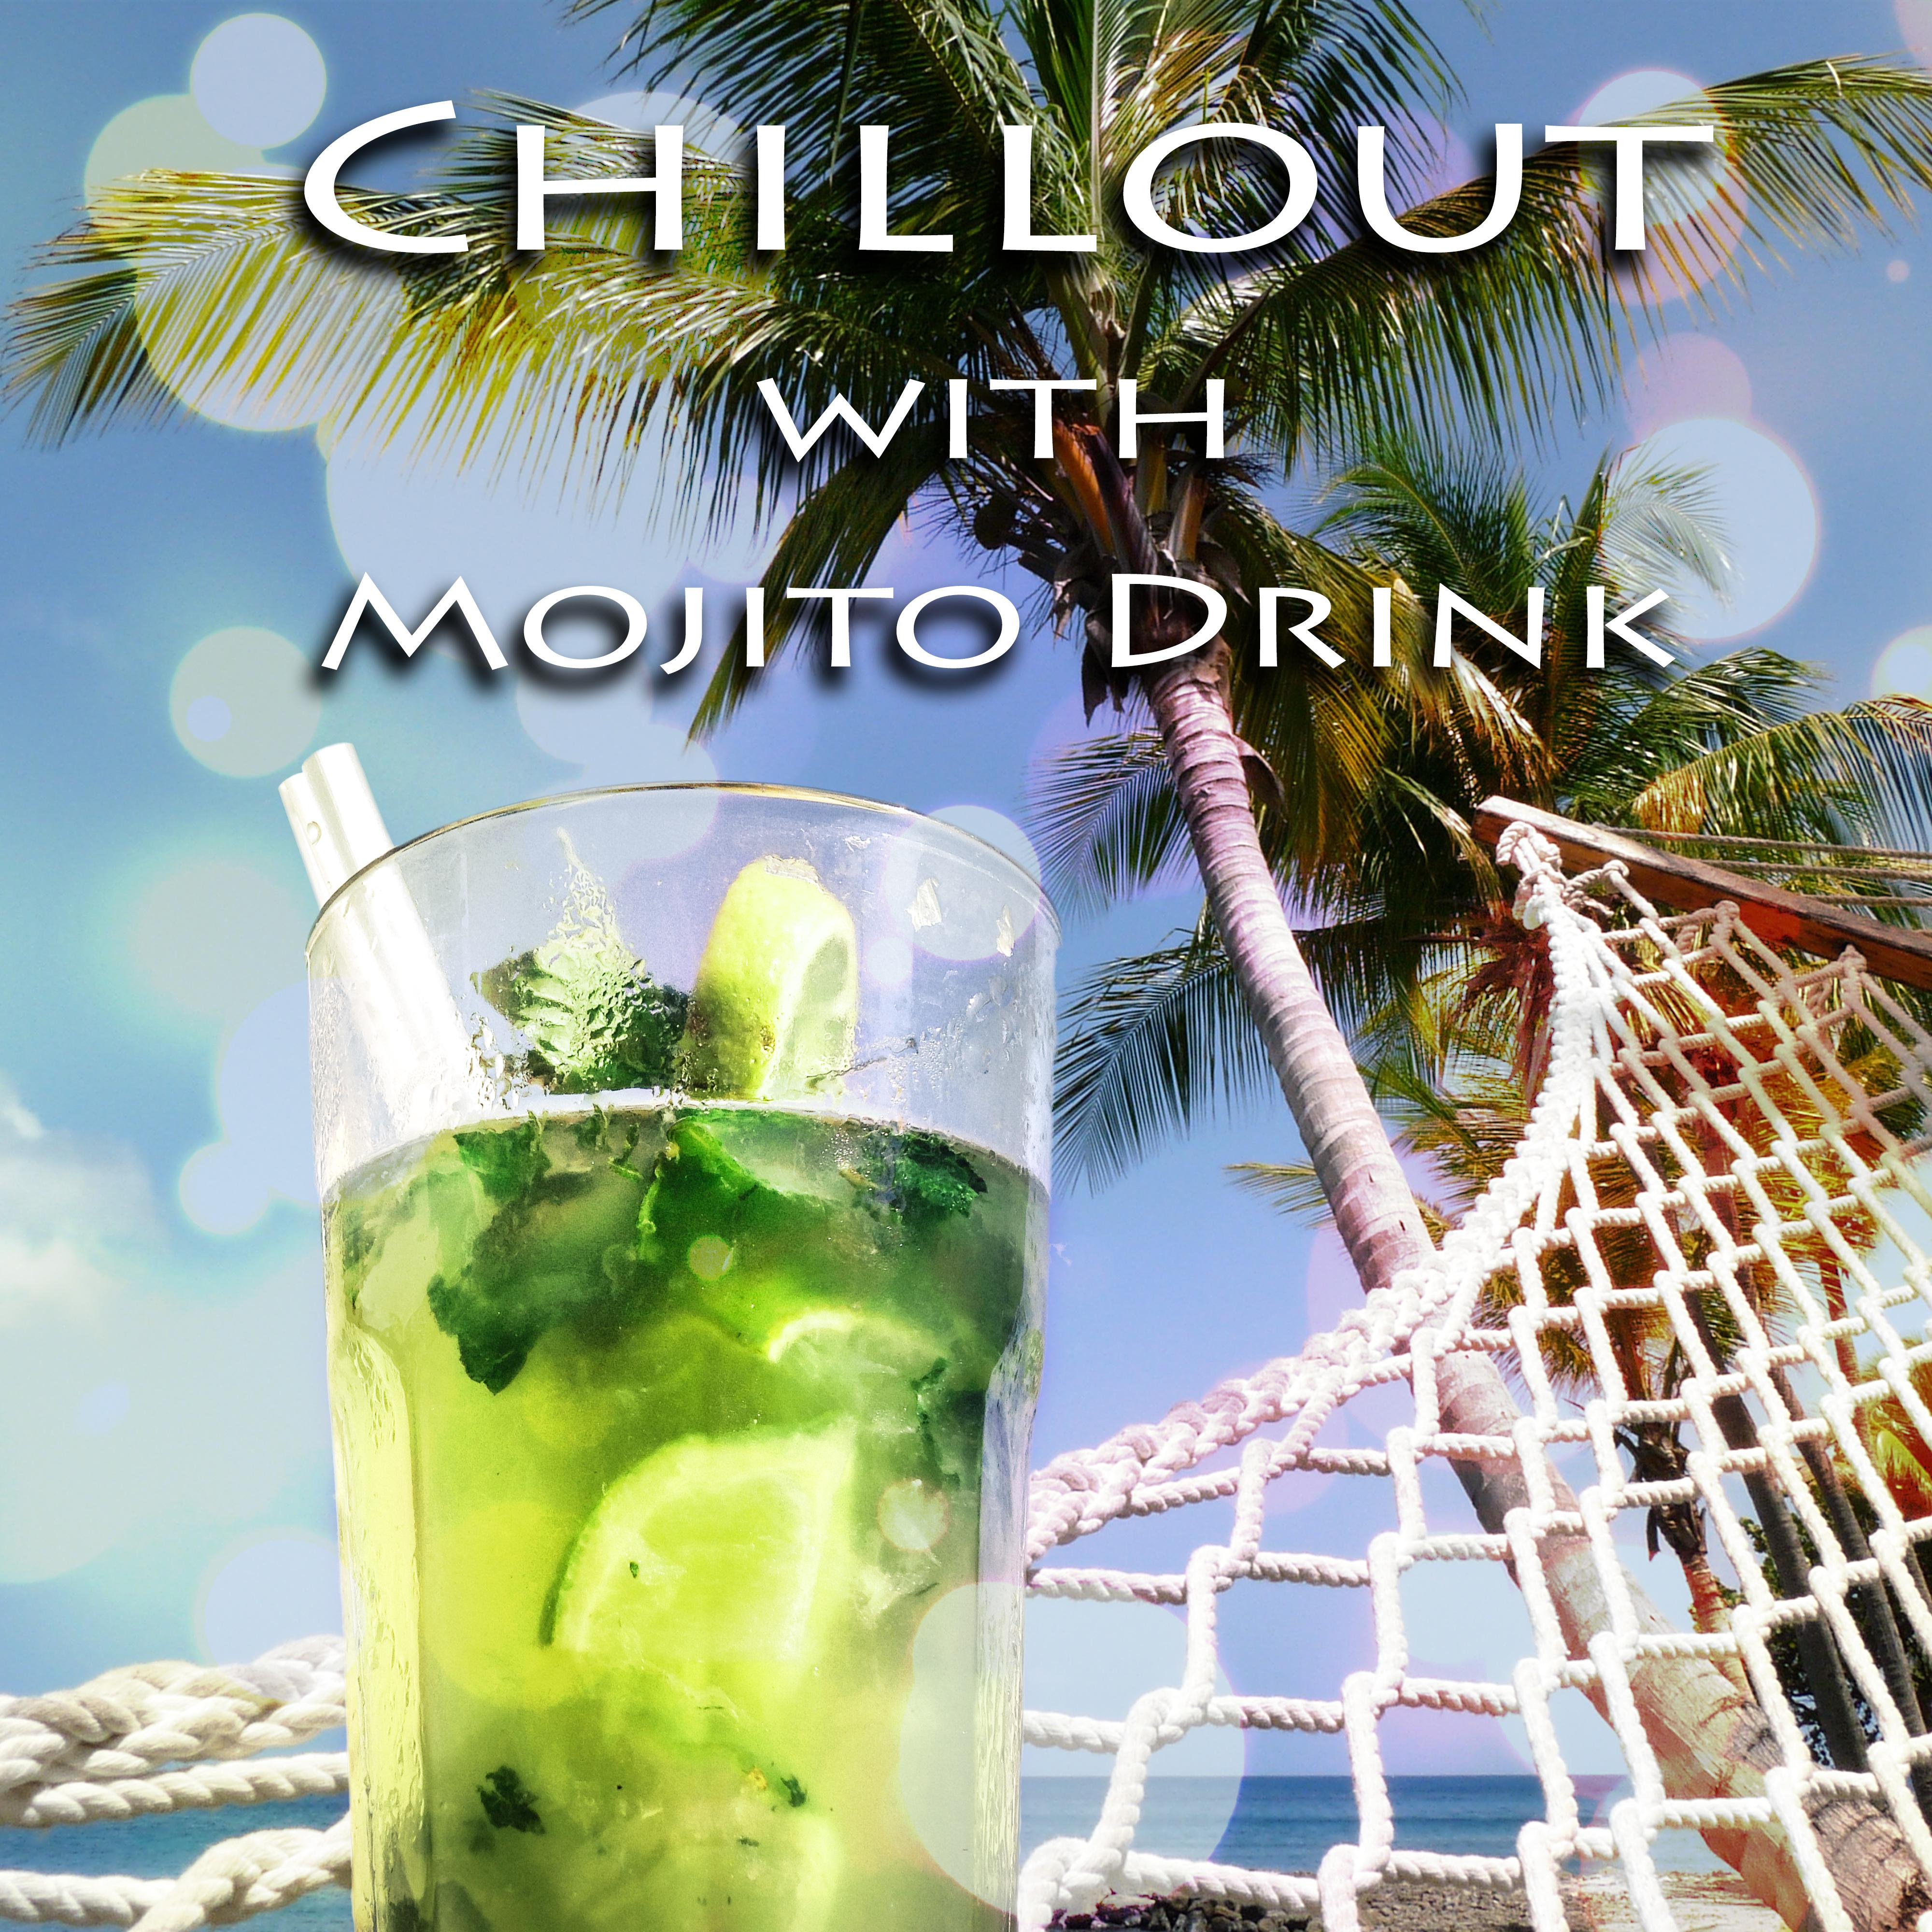 Chillout with Mojito Drink  Cool Summer Chillout Music, Summertime Beach Party Electronic Music, Chillout Session with  Music, Summer Time Relaxation on Miami Beach, Spring Break Ibiza Lounge